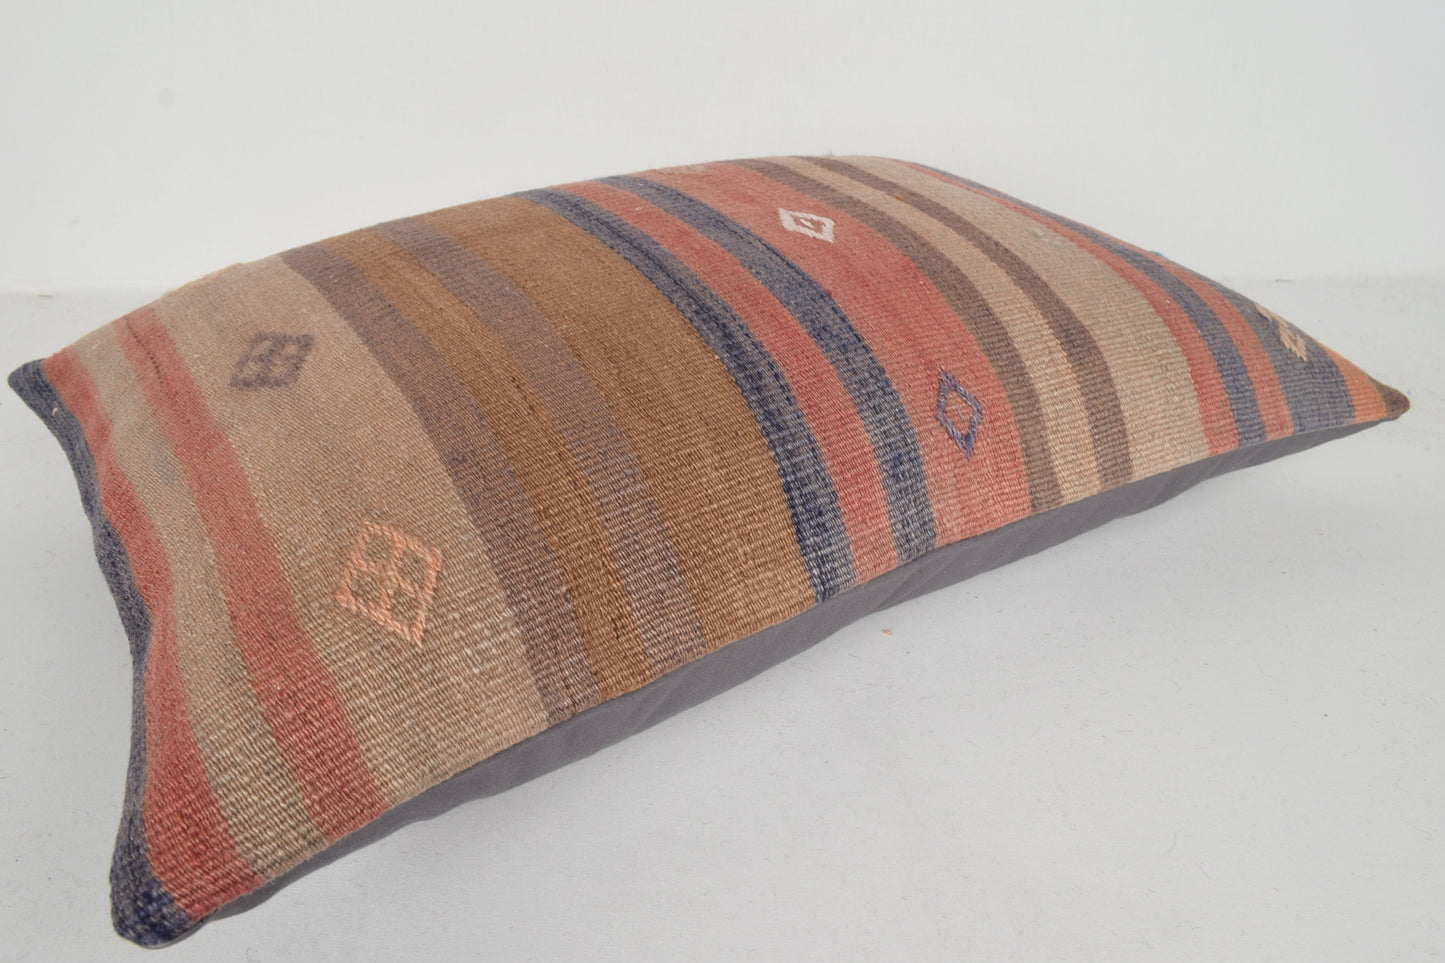 Kilim Pillow Urban Outfitters E00545 Lumbar Home Southwest Moroccan